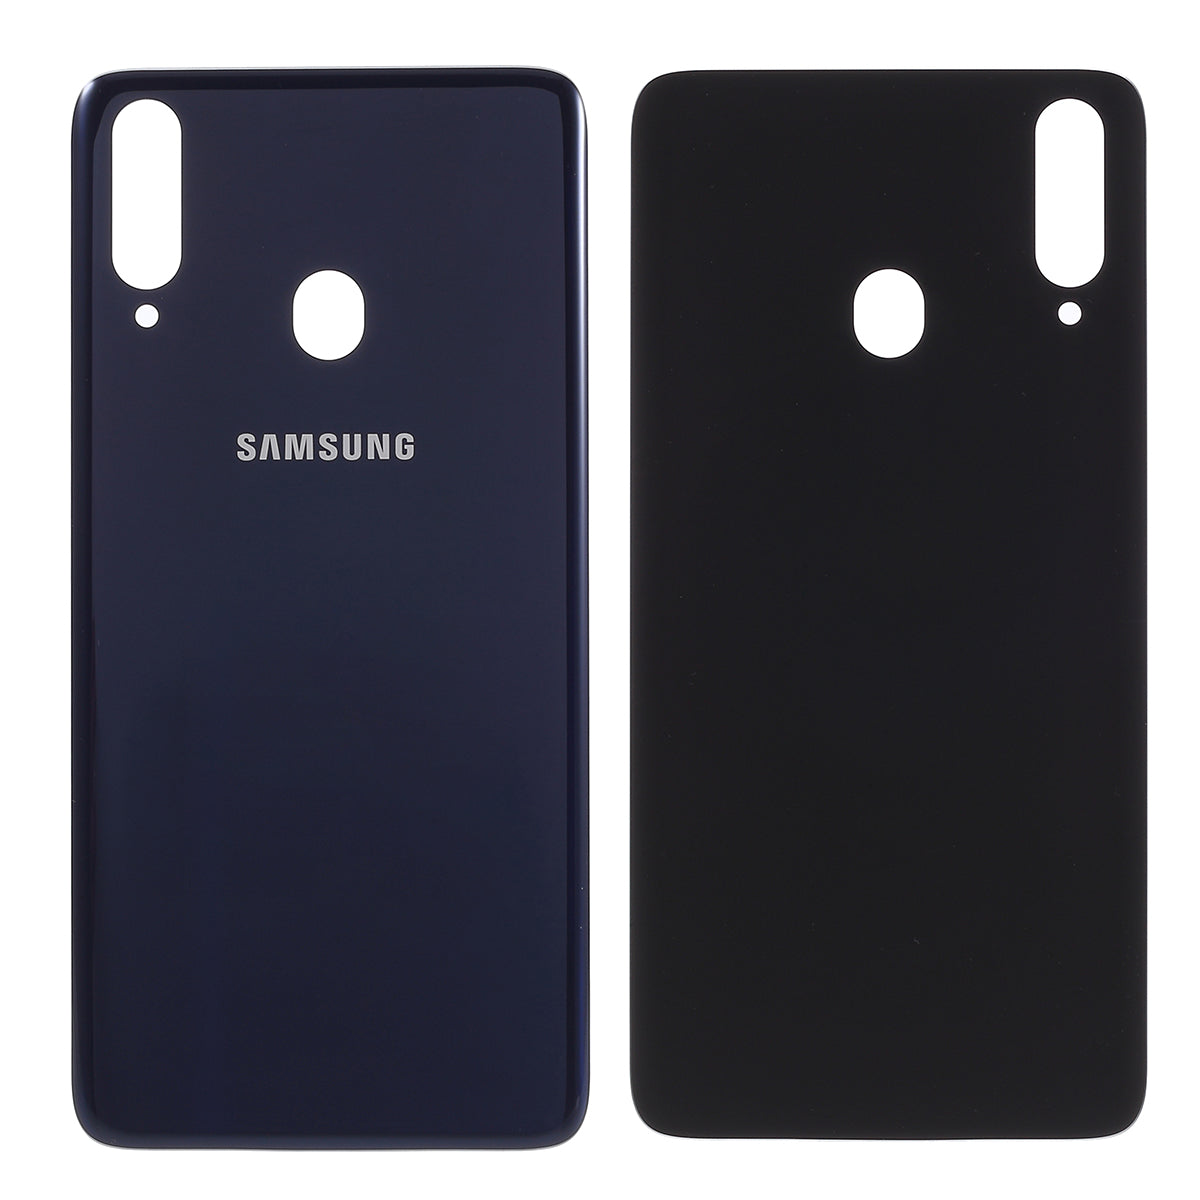 OEM Plastic Battery Door Housing Cover for Samsung Galaxy A20s SM-A207F - Blue